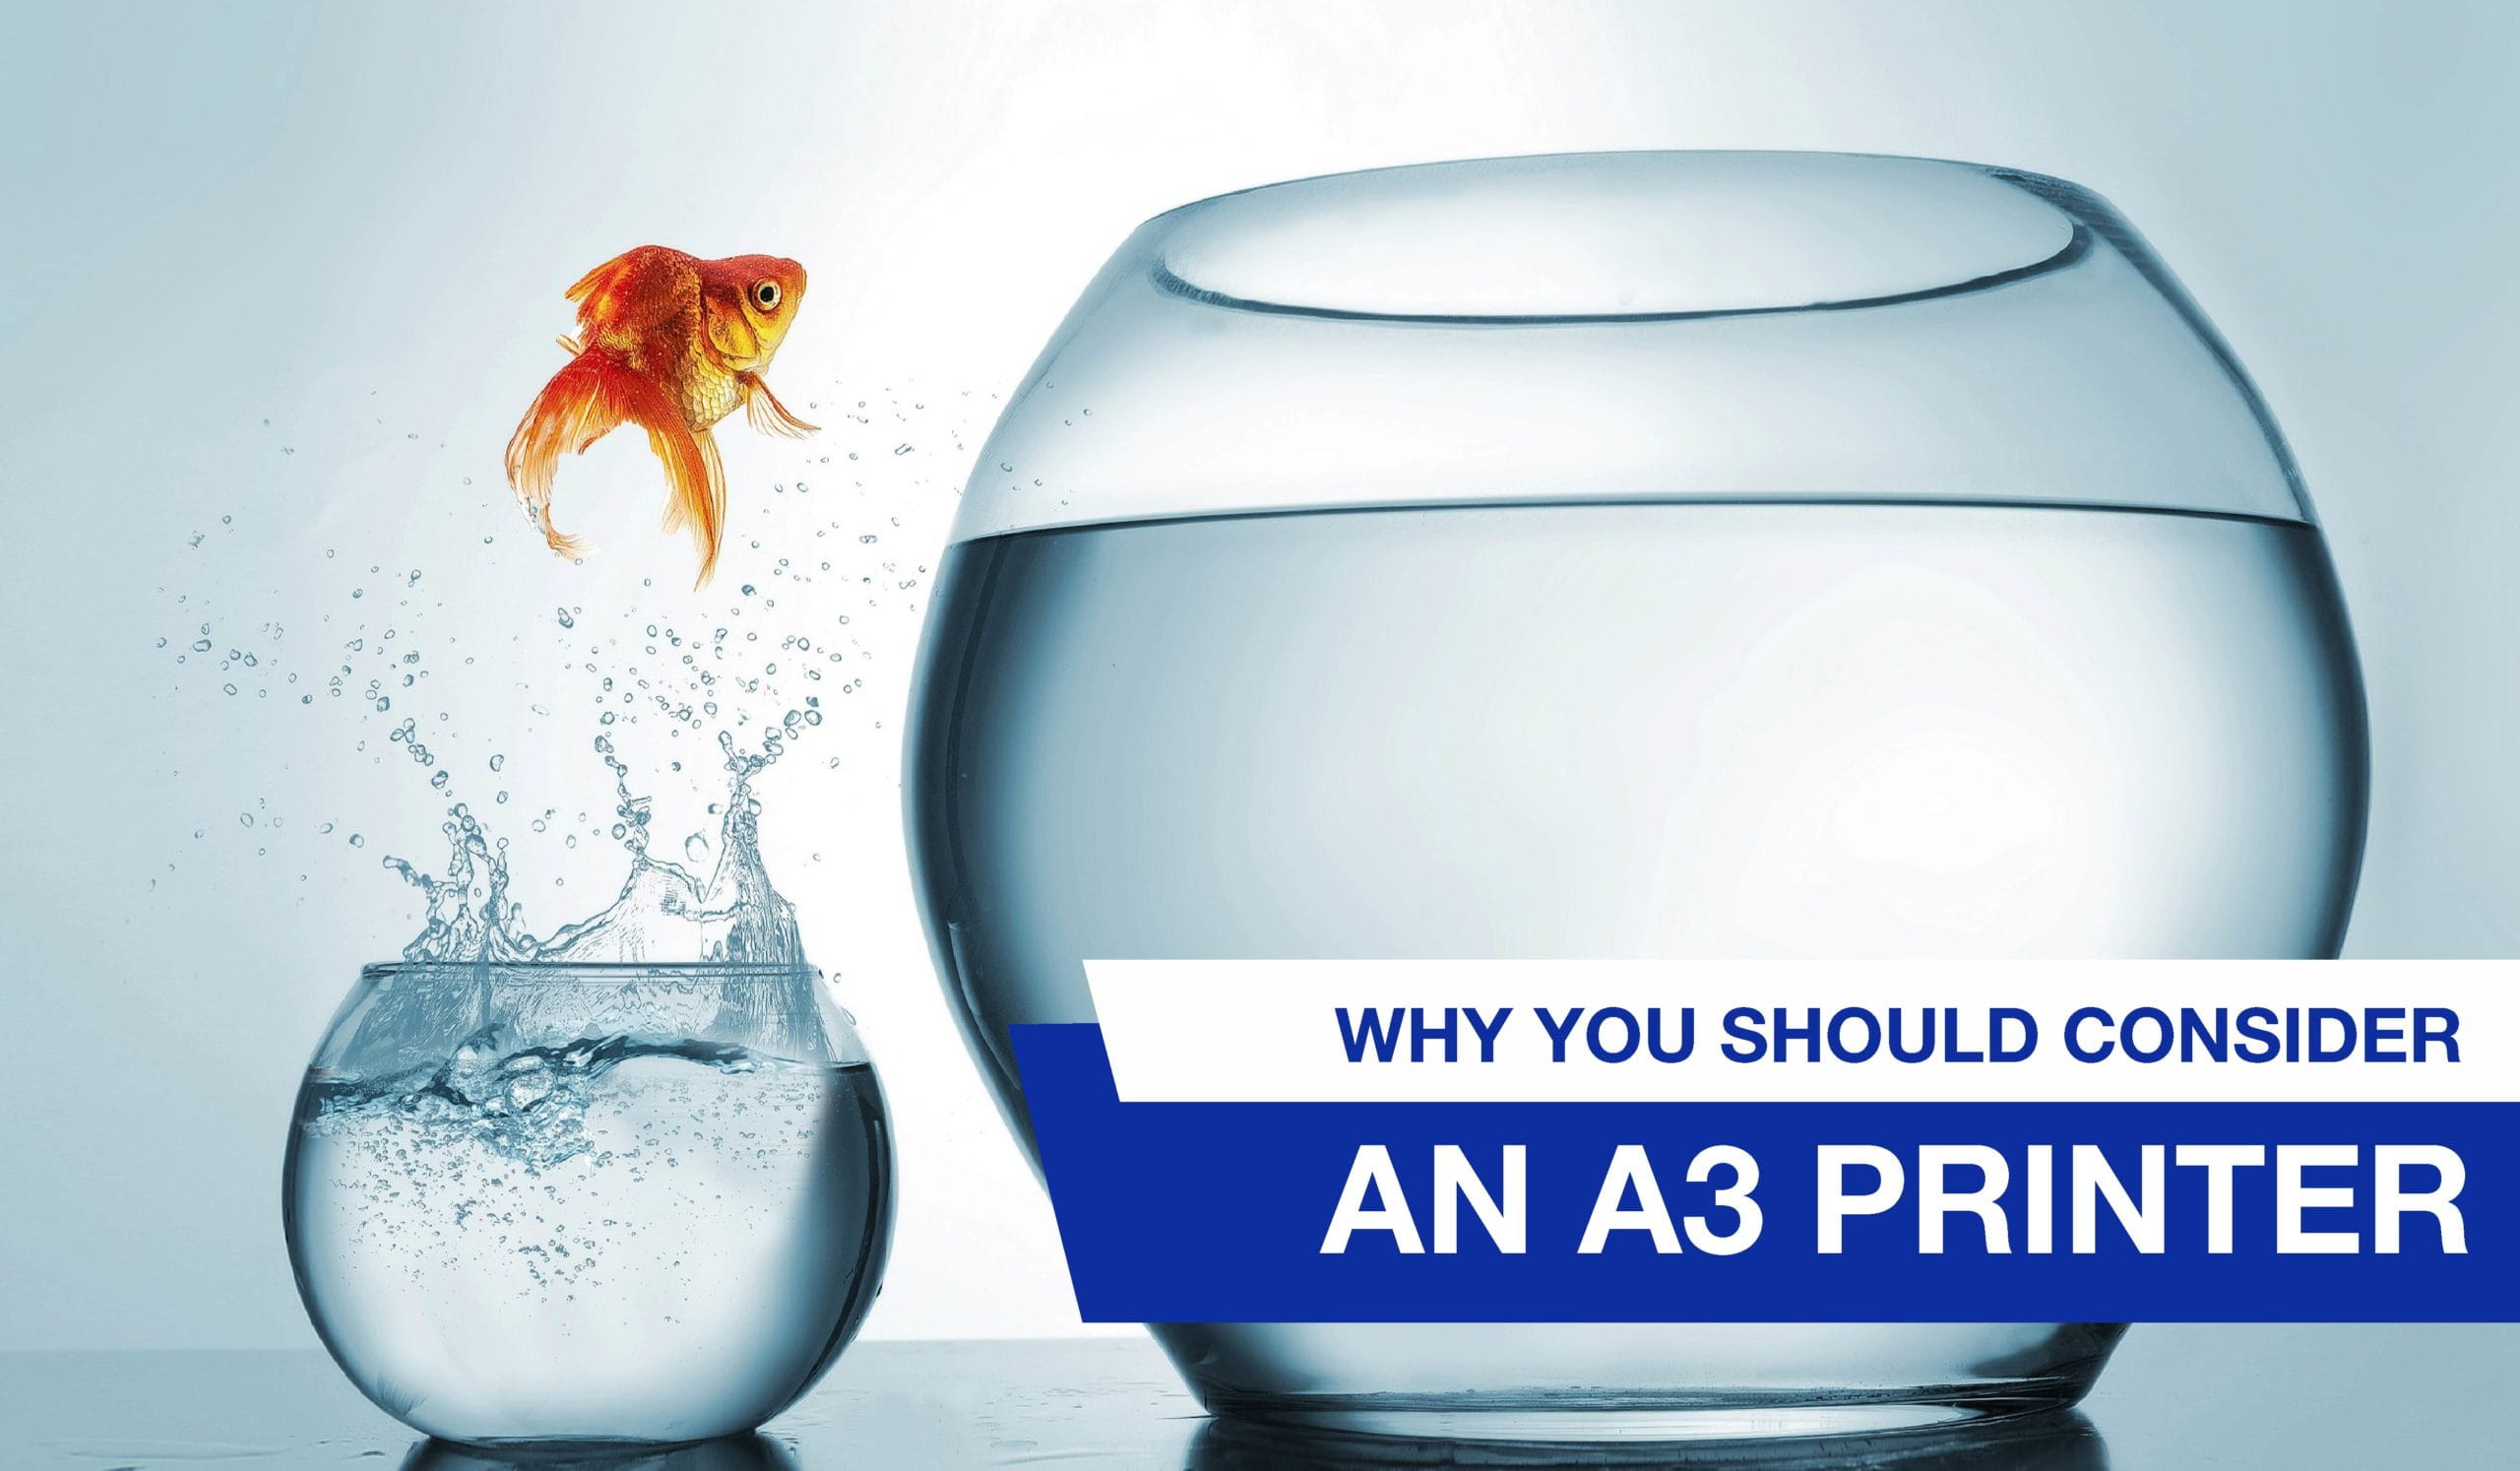 Looking for upsized possibilities? Here’s why you should consider an A3 printer.